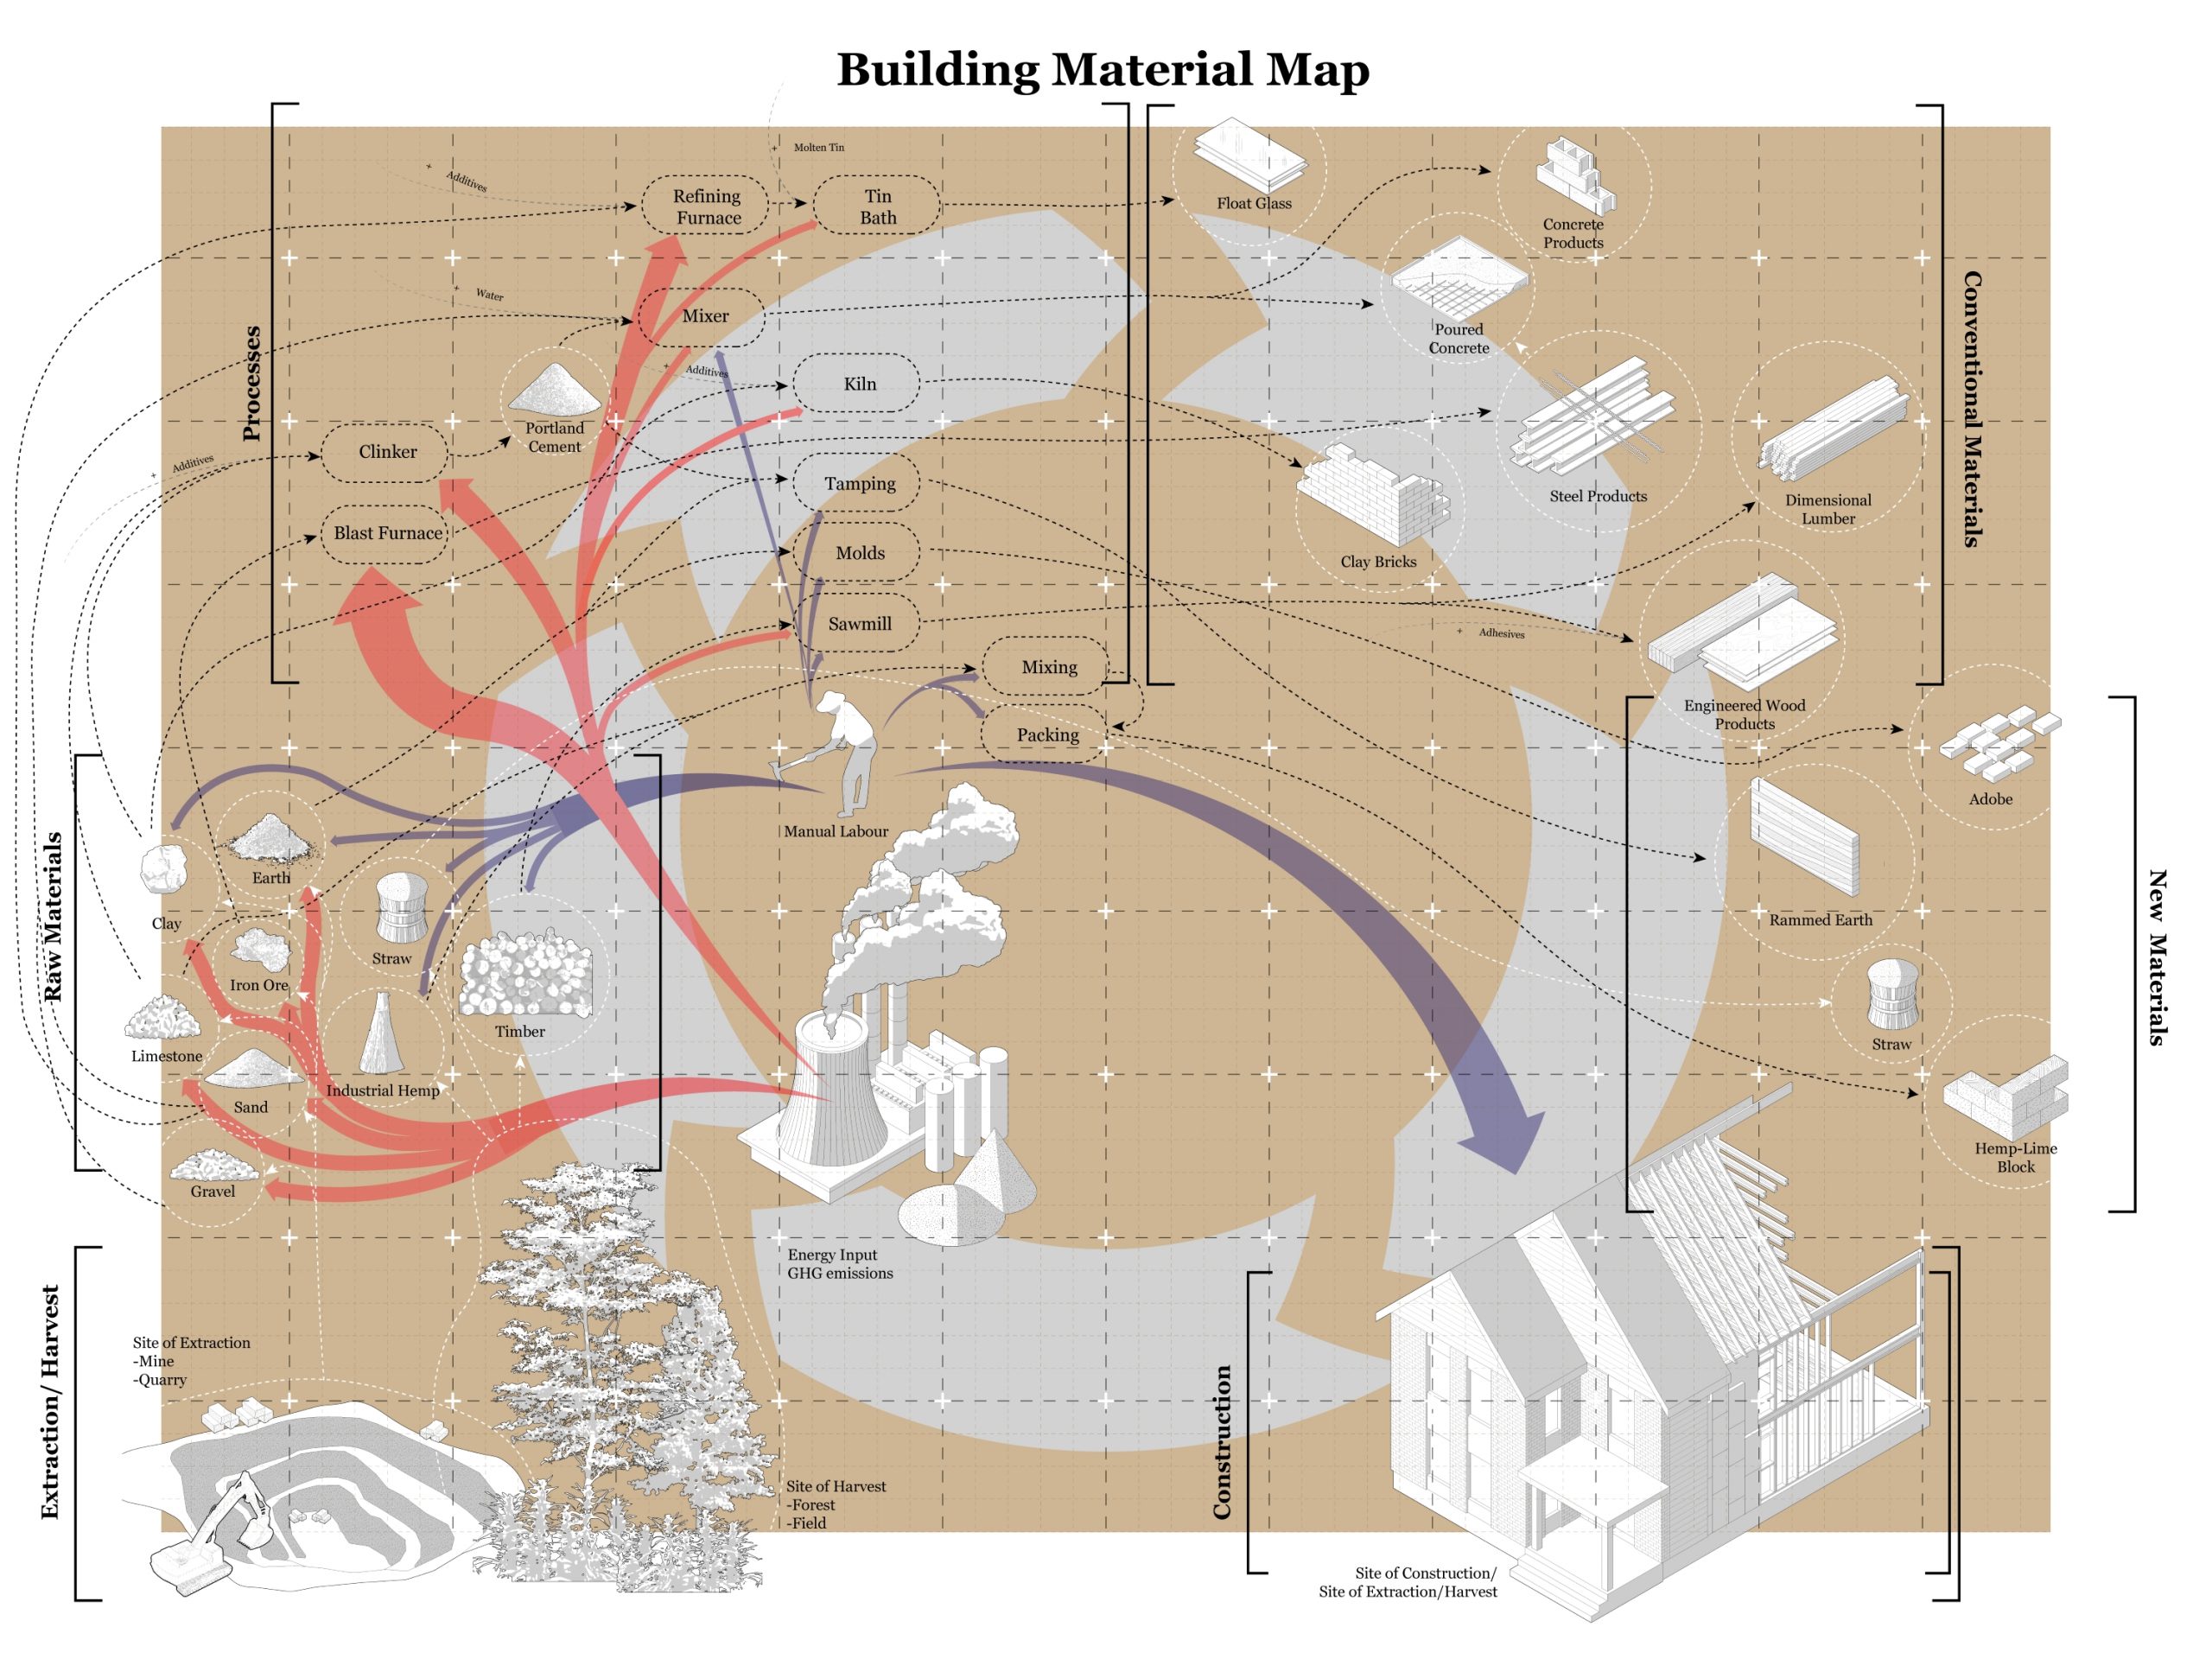 A diagram showing a building material map